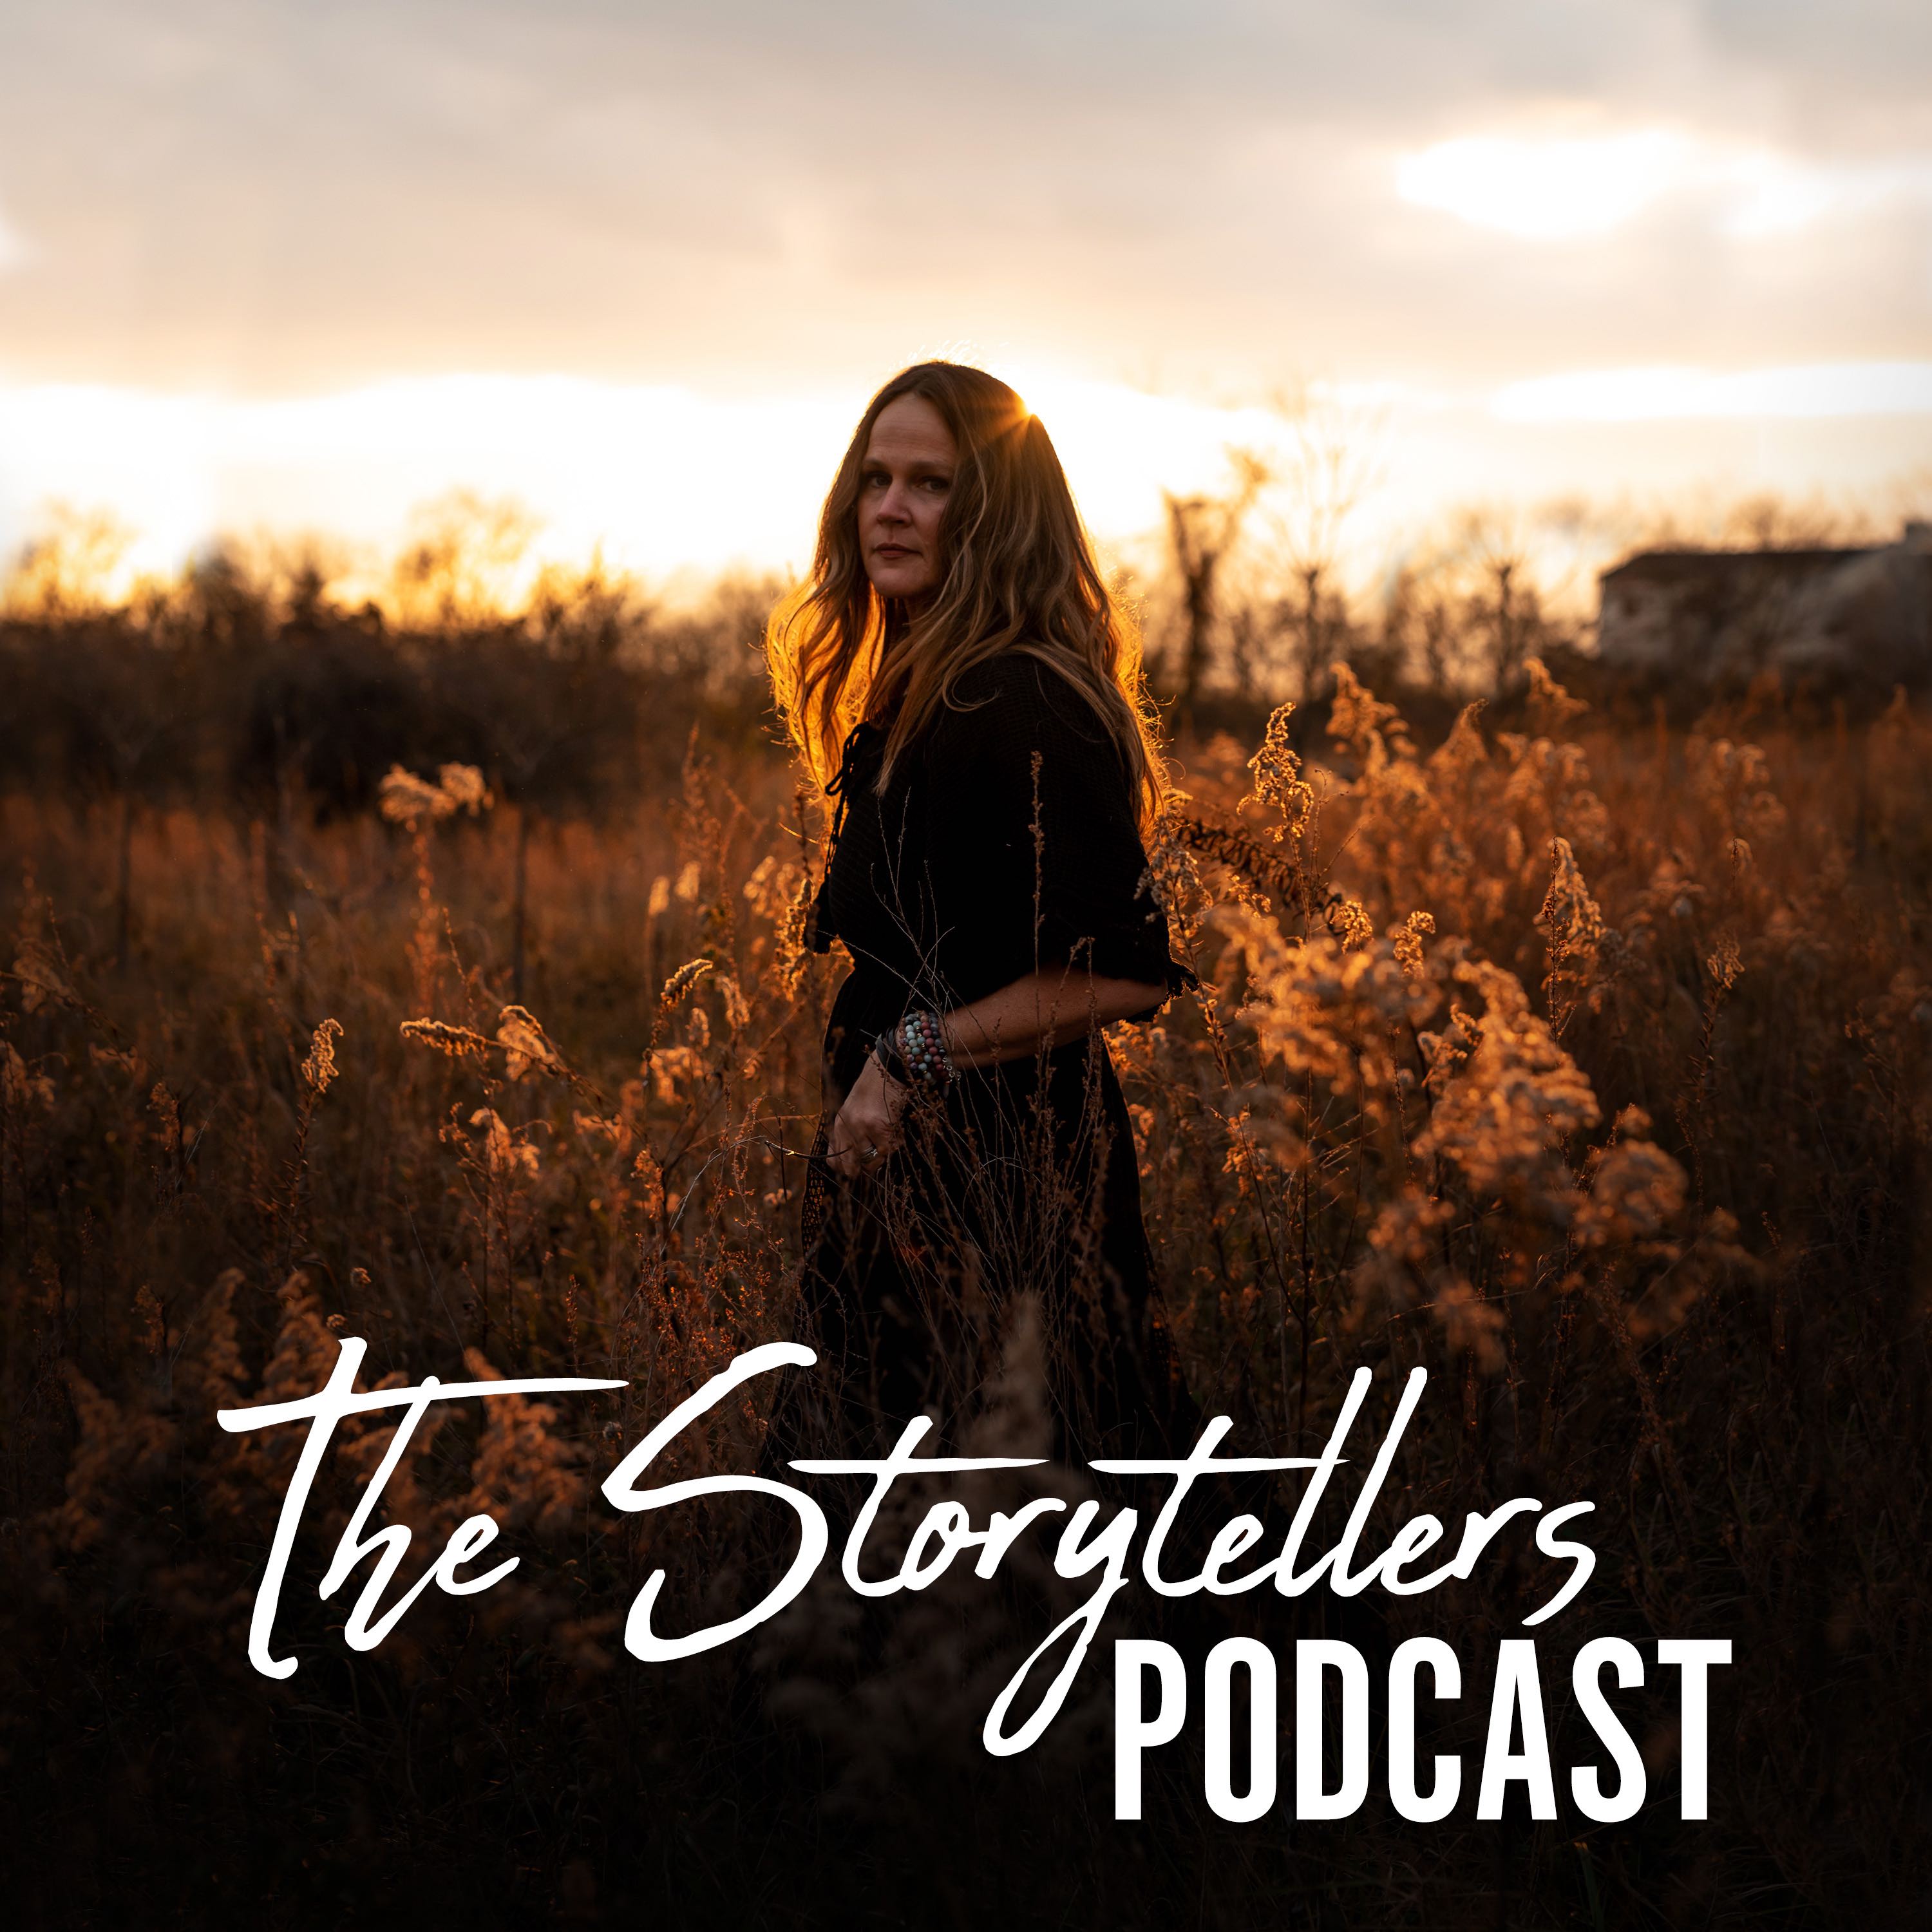 The Storytellers Podcast: Elevating Your Life Through Inspiring, Unexpected Moments